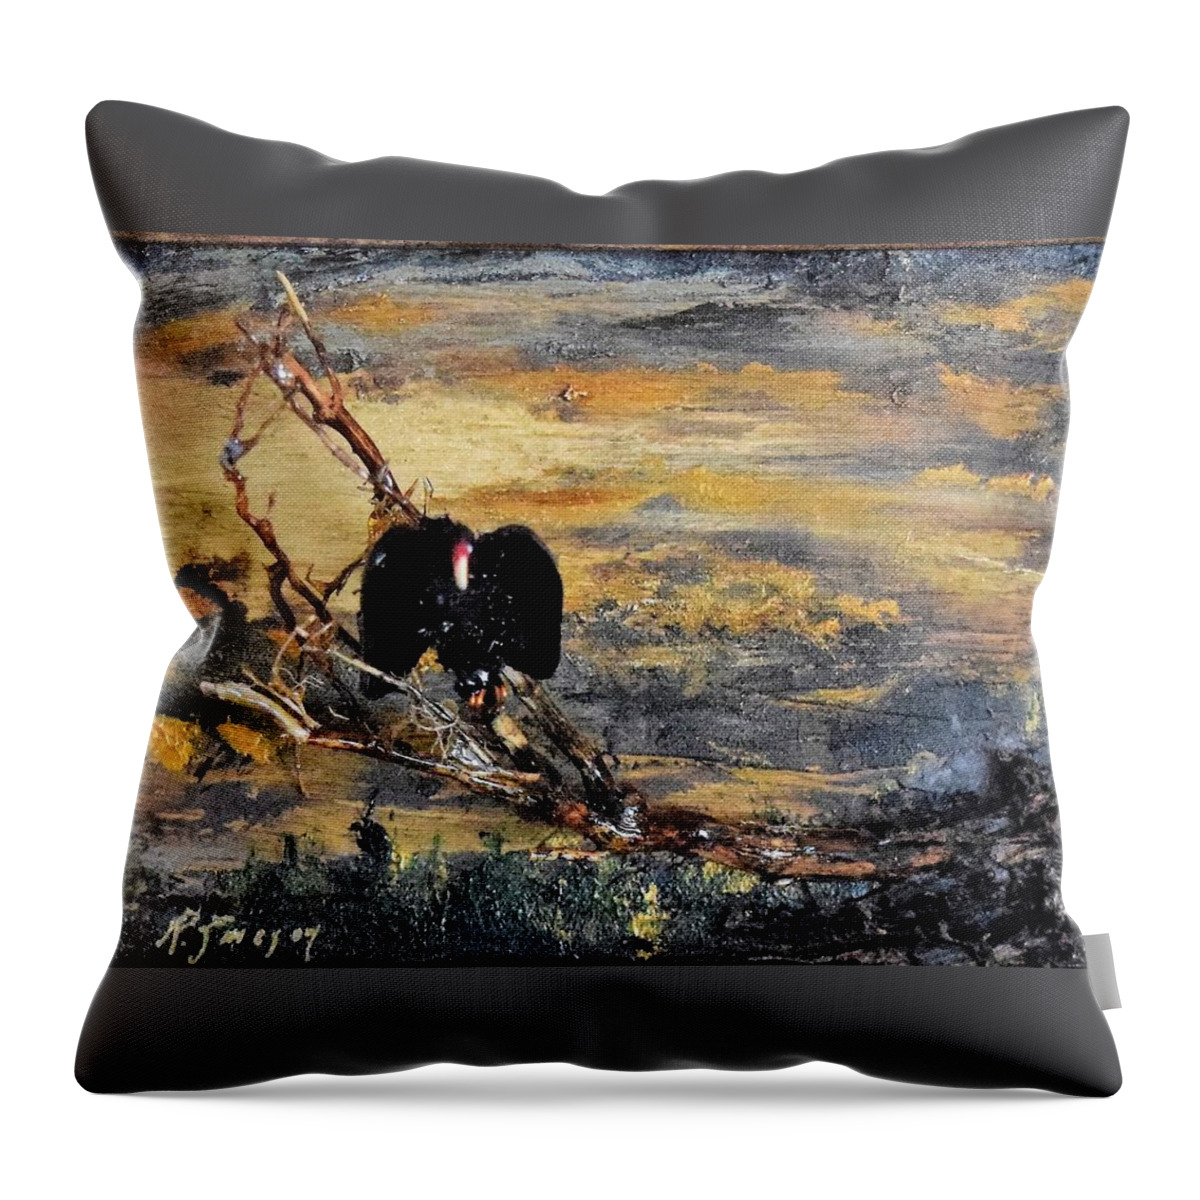 Vulture Throw Pillow featuring the painting Vulture with Oncoming Storm by Roger Swezey